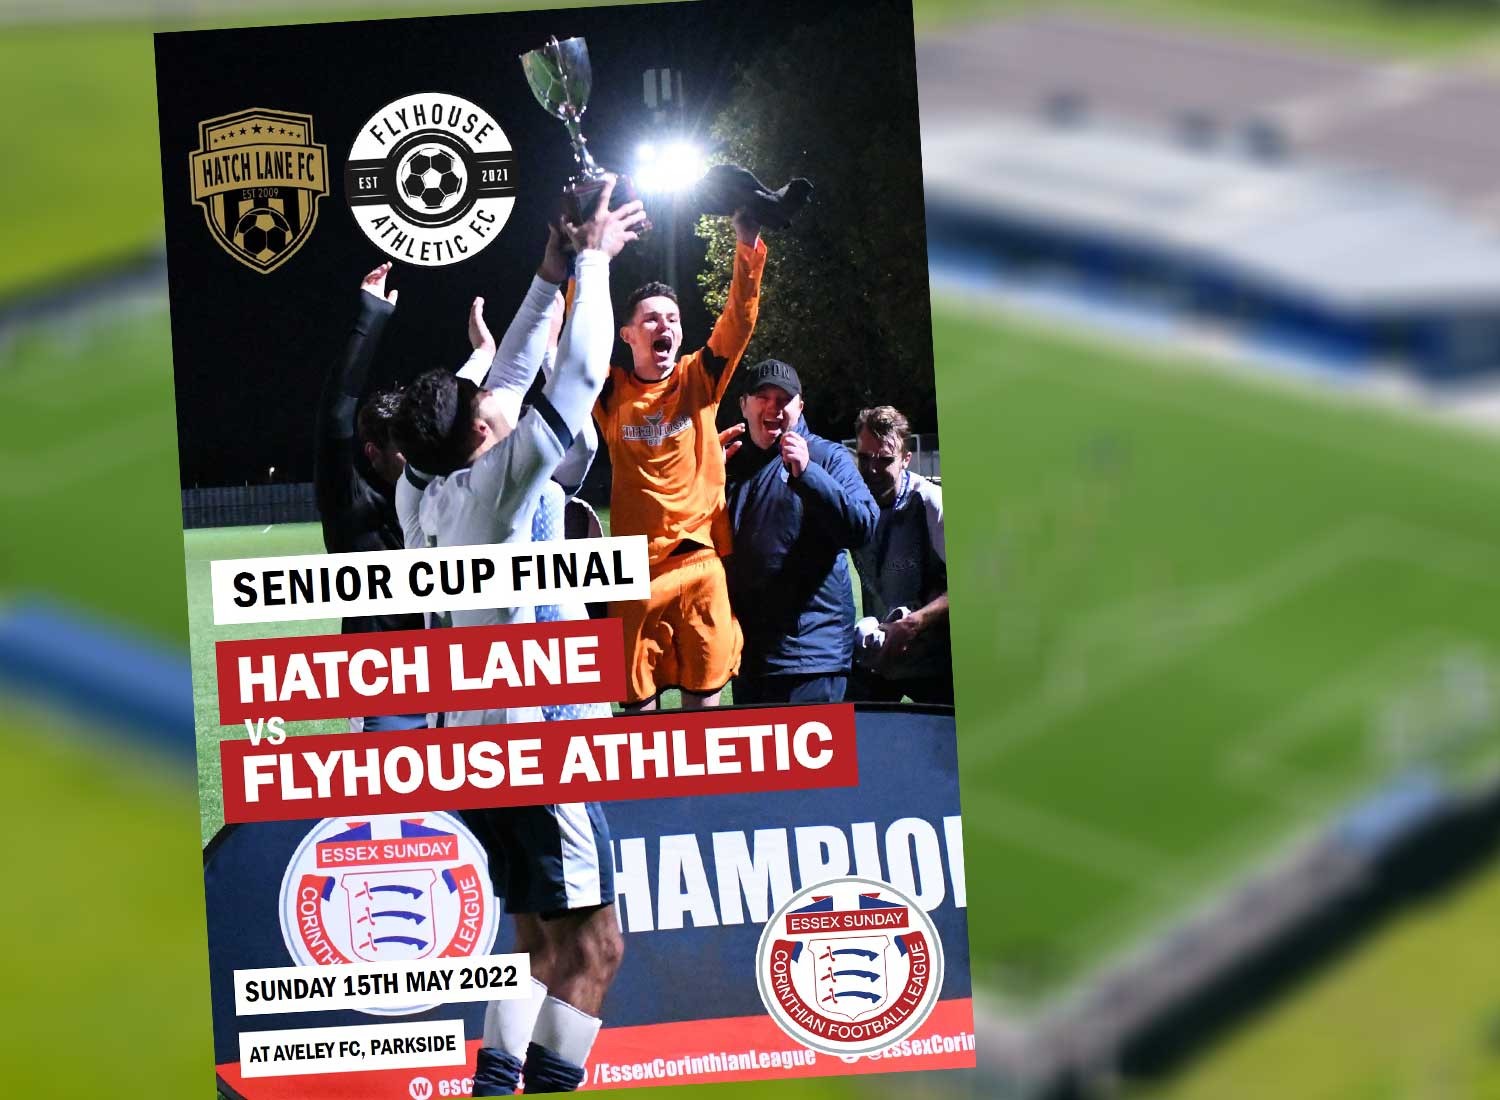 Hatch Lane and Flyhouse Athletic face off for the Senior Cup this Sunday